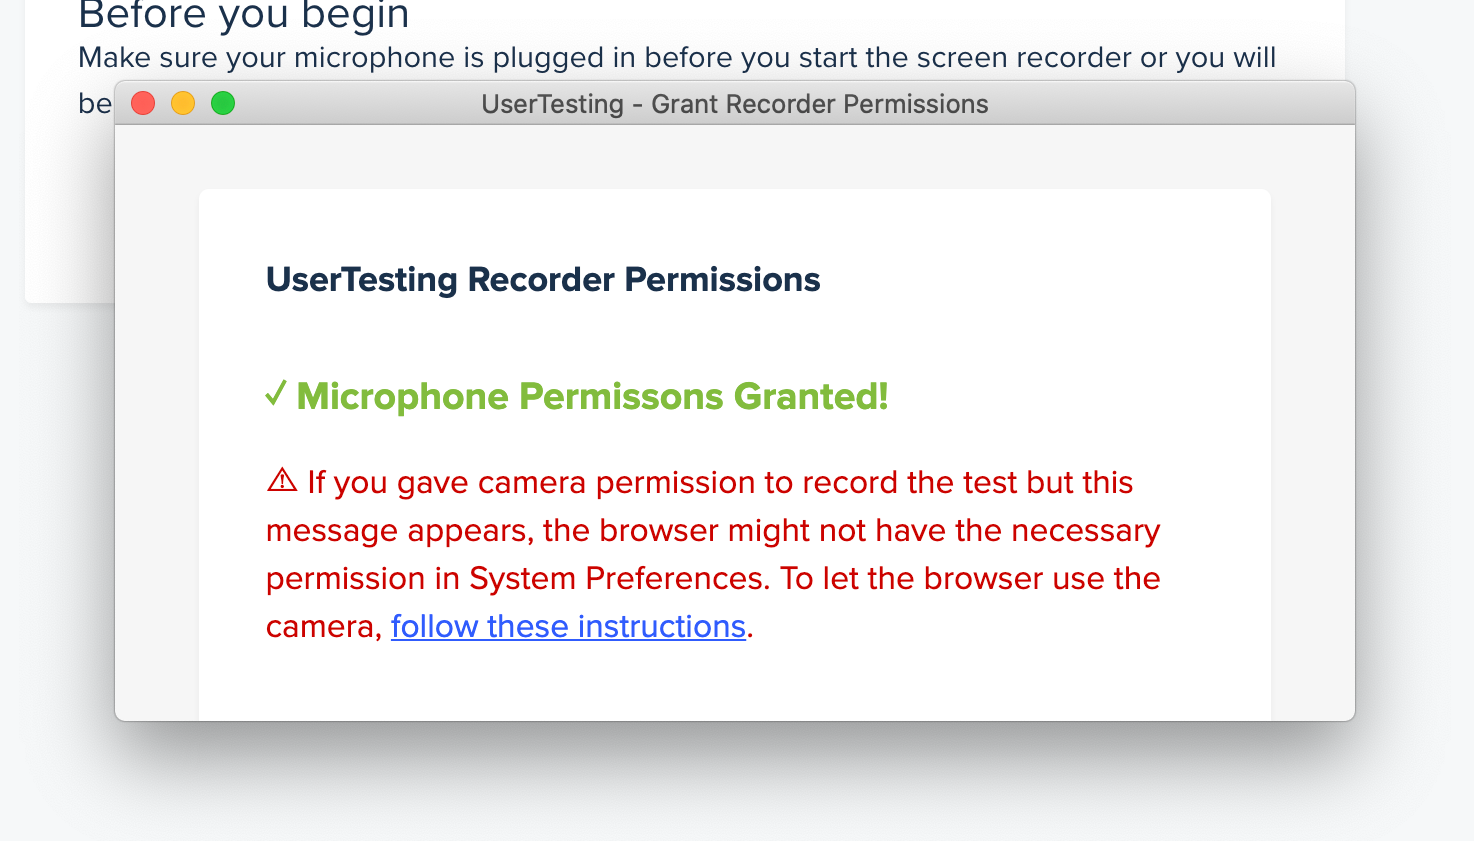 UserTesting_-_Grant_Recorder_Permissions_and_available_sessions_record_-_UserTesting.png